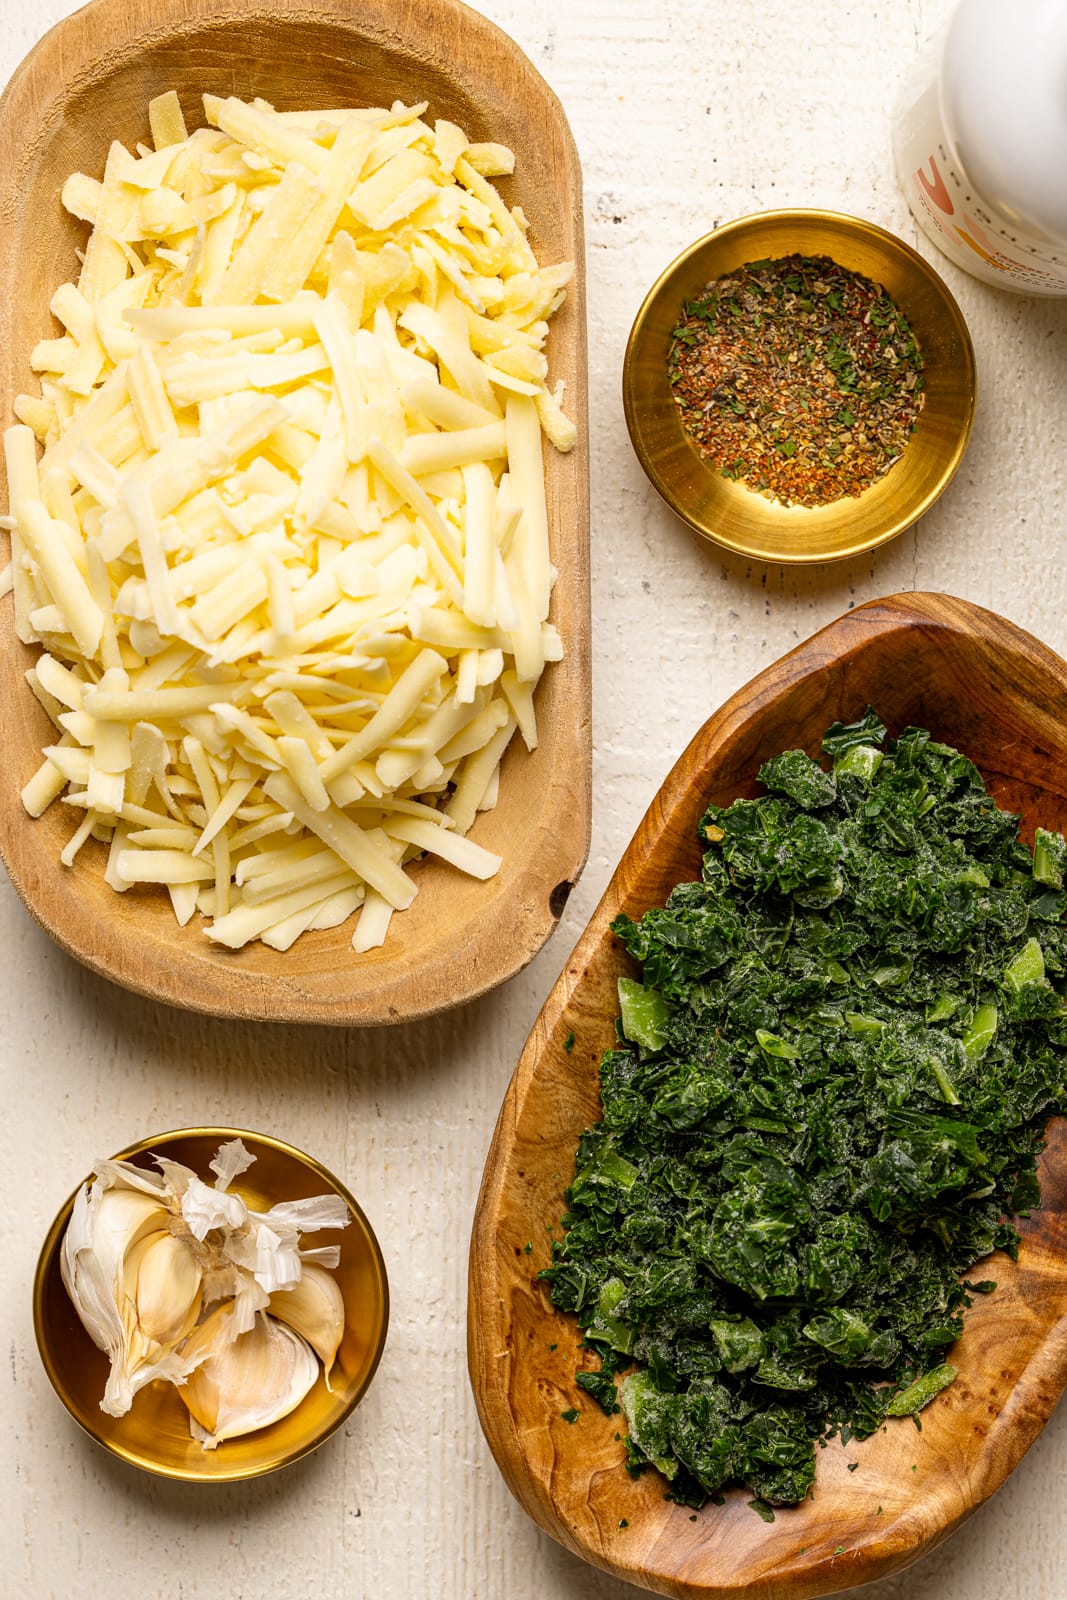 Ingredients on a white wood table including chopped kale, garlic, cheese, and herbs + seasonings. 